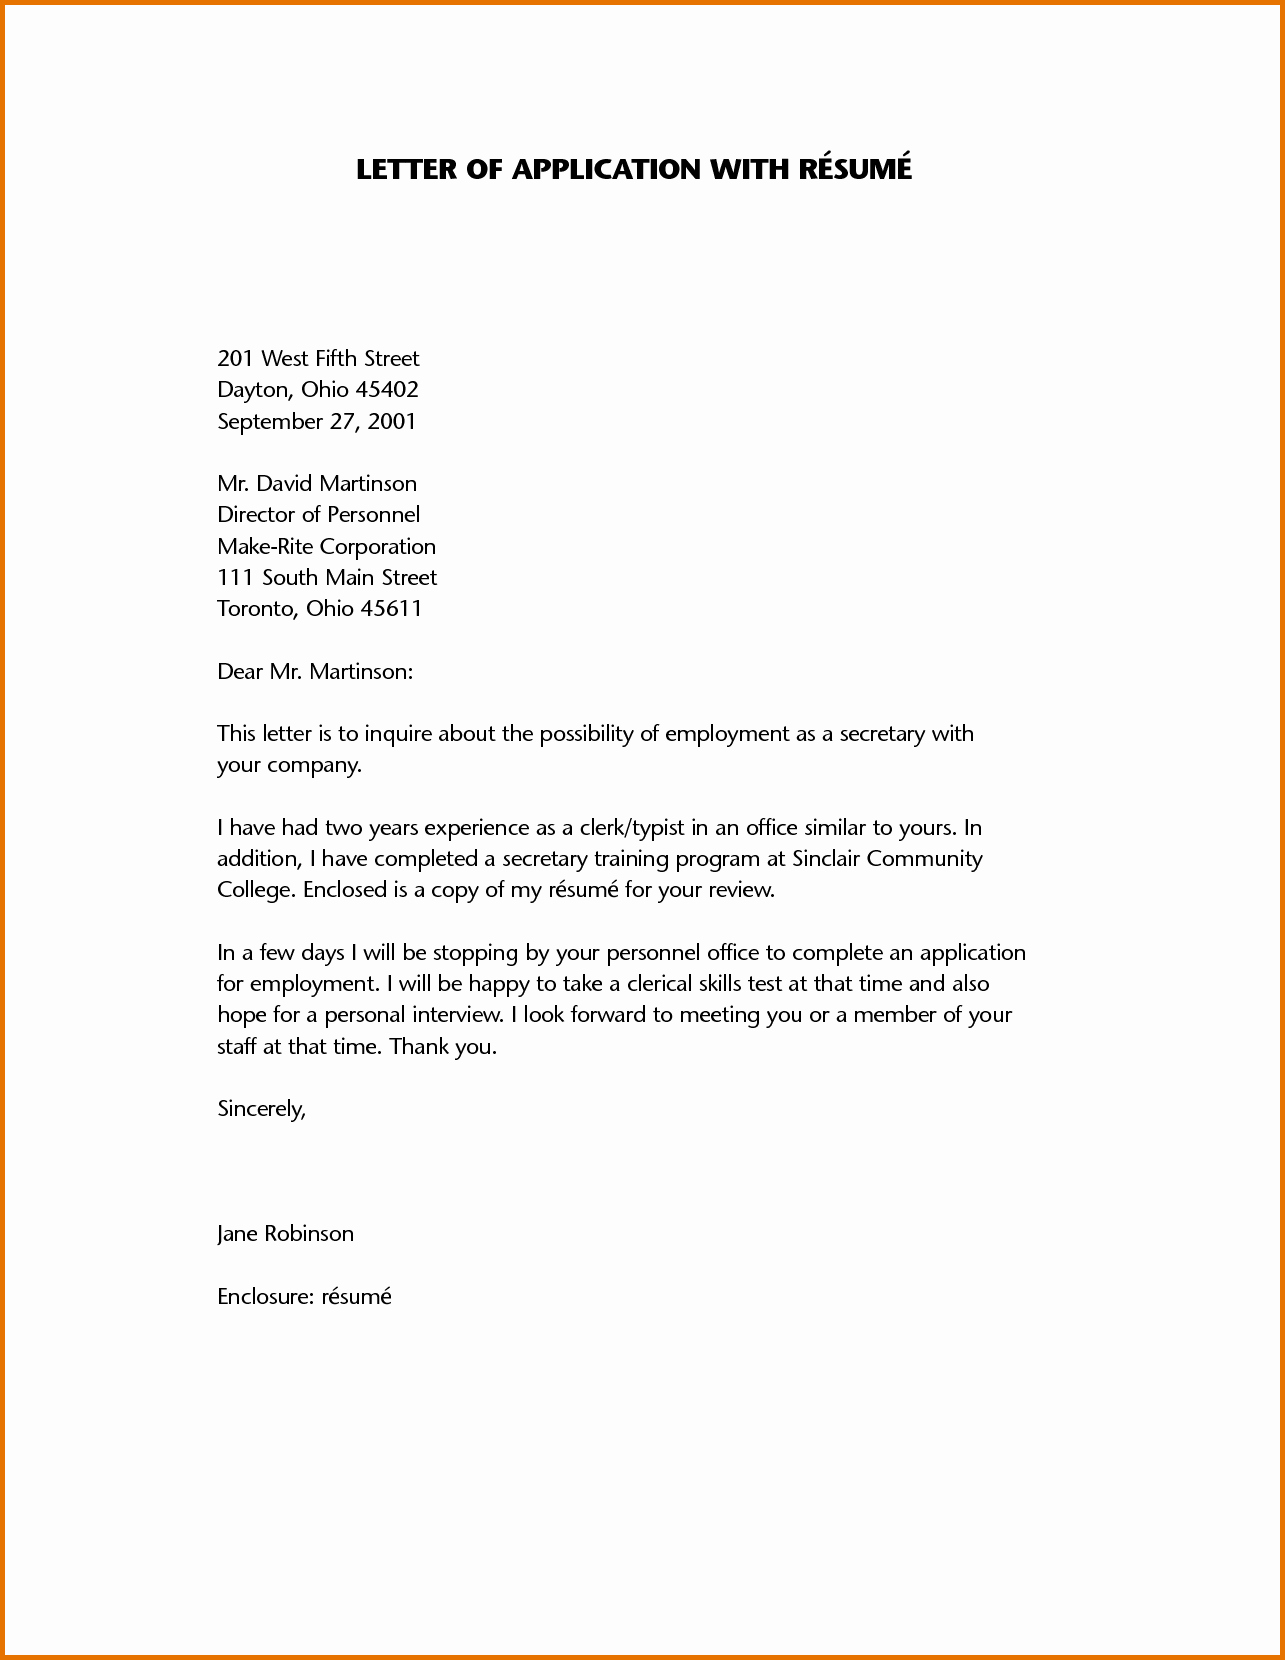 Resume and Cover Letter format Awesome Sample Of Application Letter and Resumereference Letters